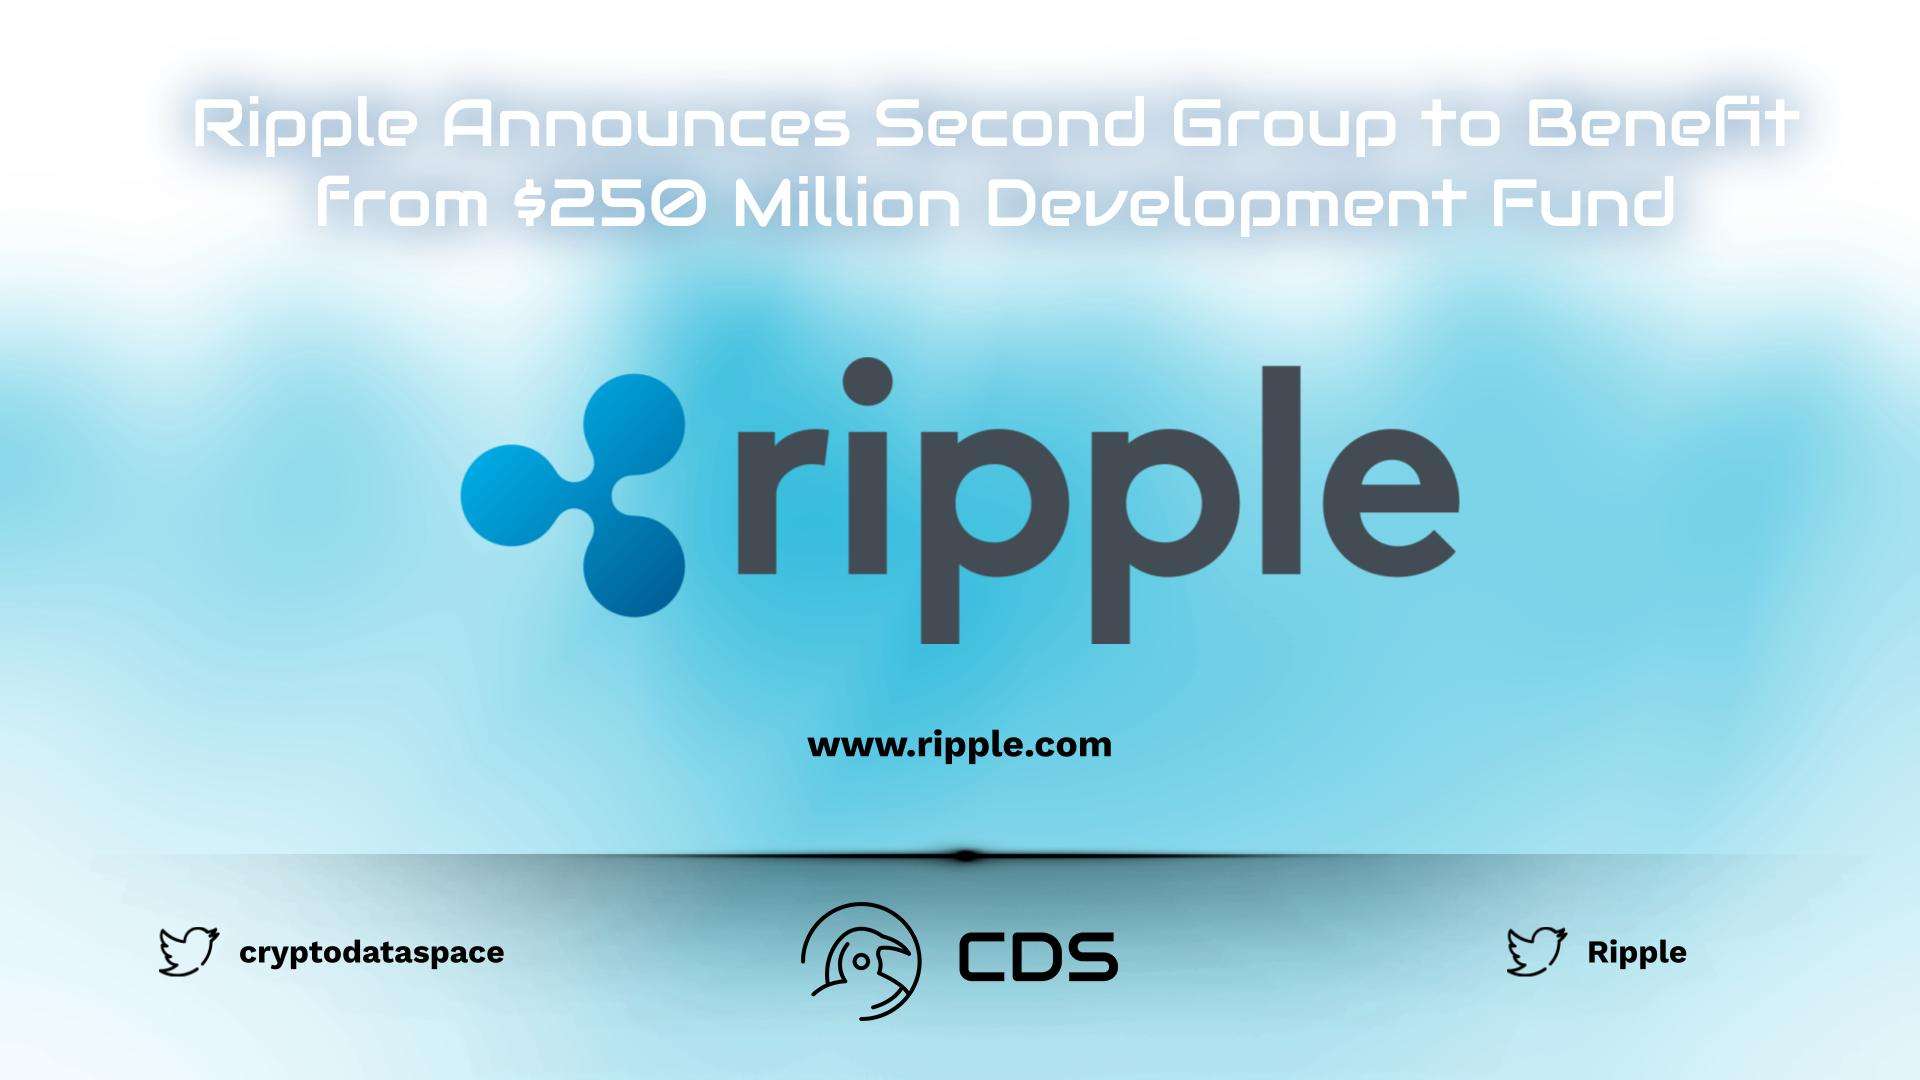 Ripple Announces Second Group to Benefit from $250 Million Development Fund